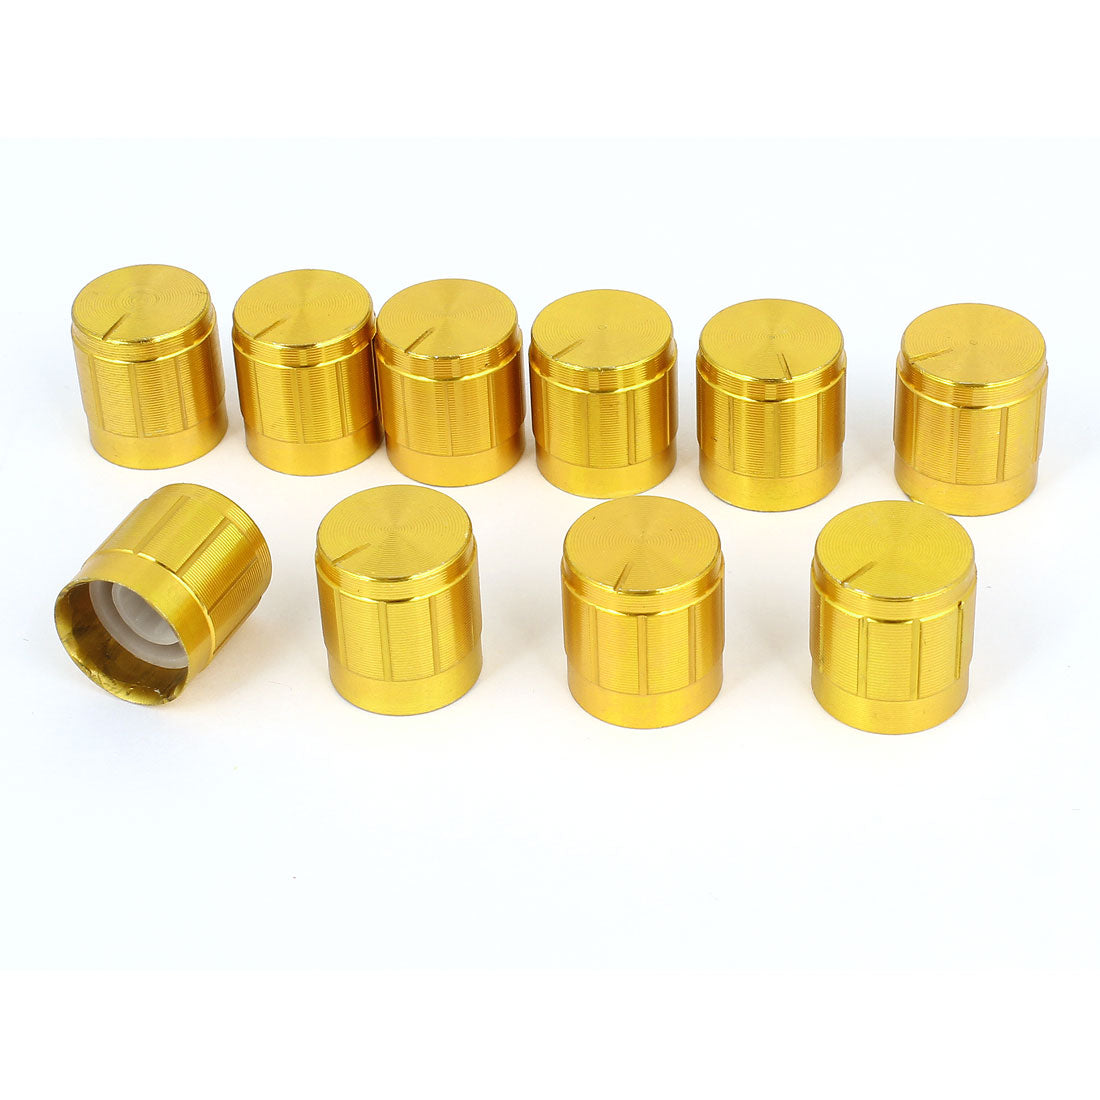 uxcell Uxcell 10pcs 6mm Hole Dia Bulb Light Lamp Dimmer Control Rotary Knob Cap Gold Tone